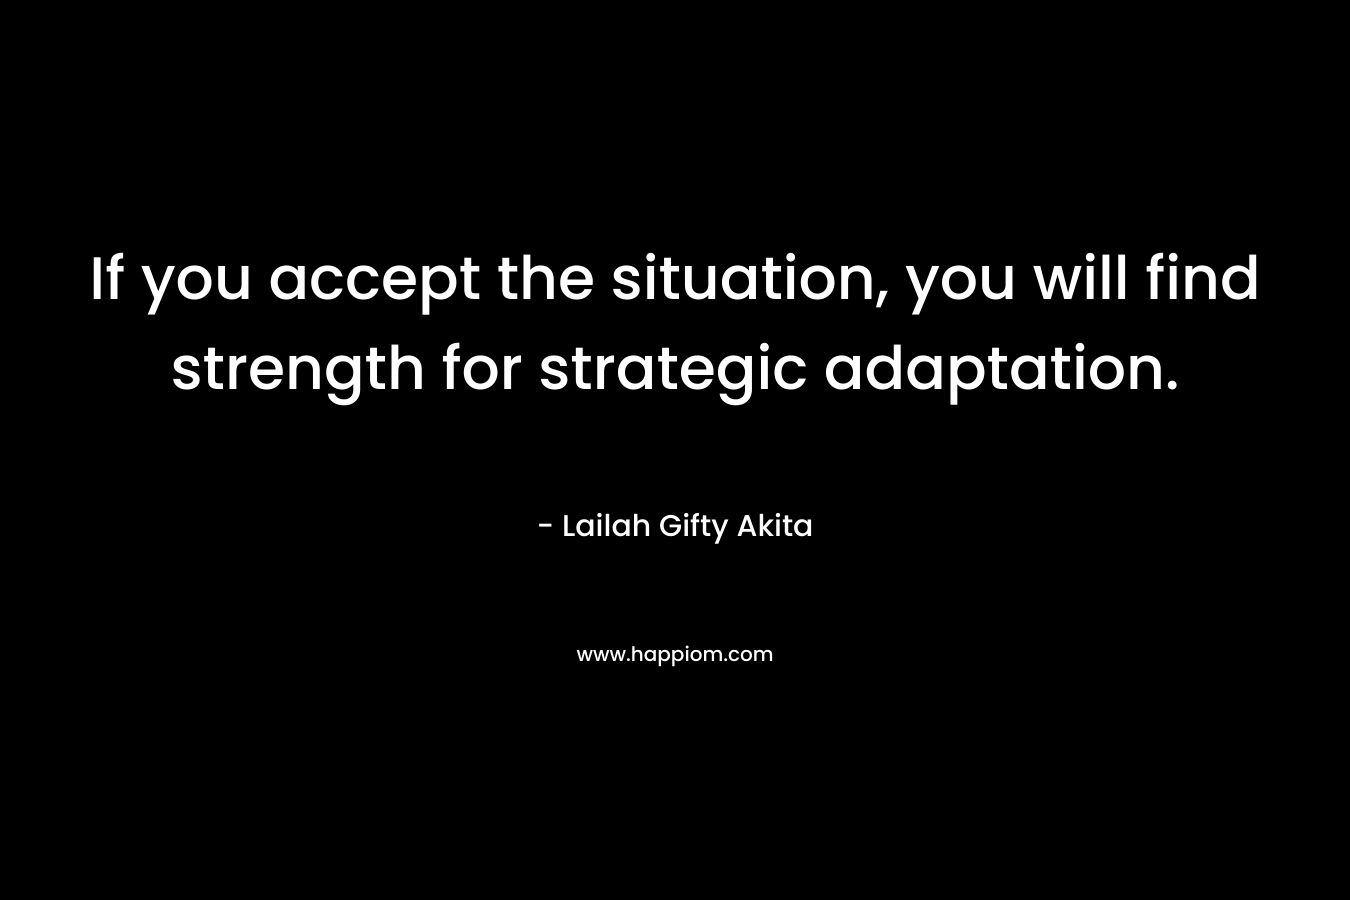 If you accept the situation, you will find strength for strategic adaptation.